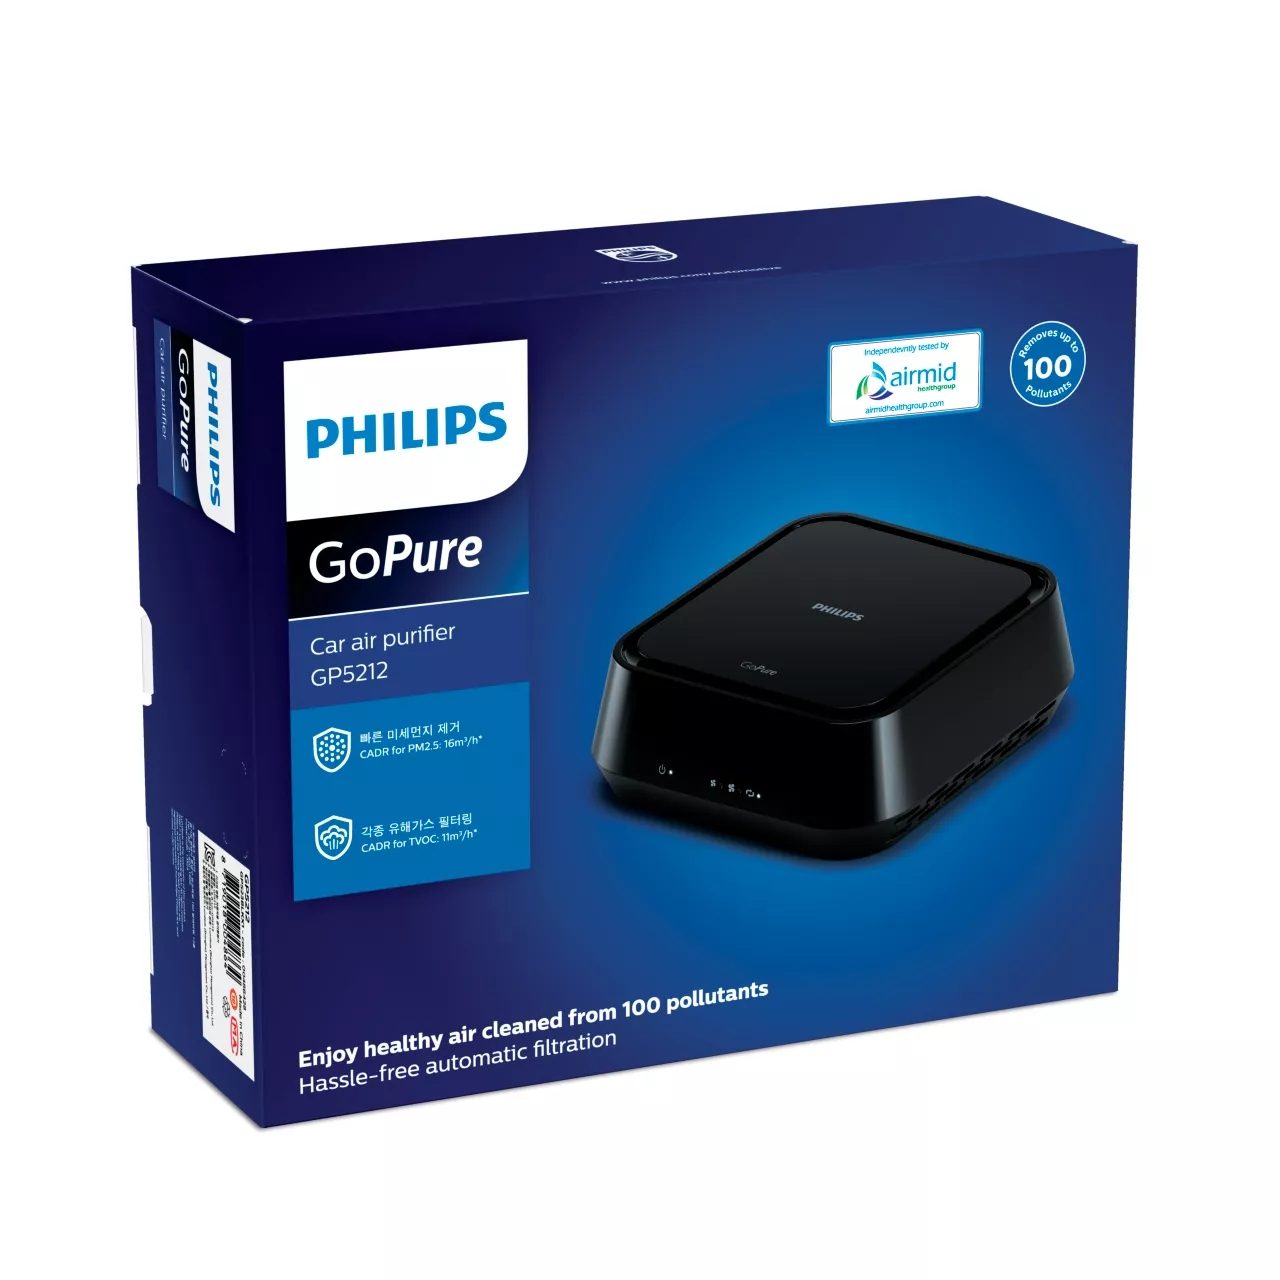 Have learned Philadelphia Accurate PHILIPS Air Cleaner GoPure 5212 Kills 90% Bacteria